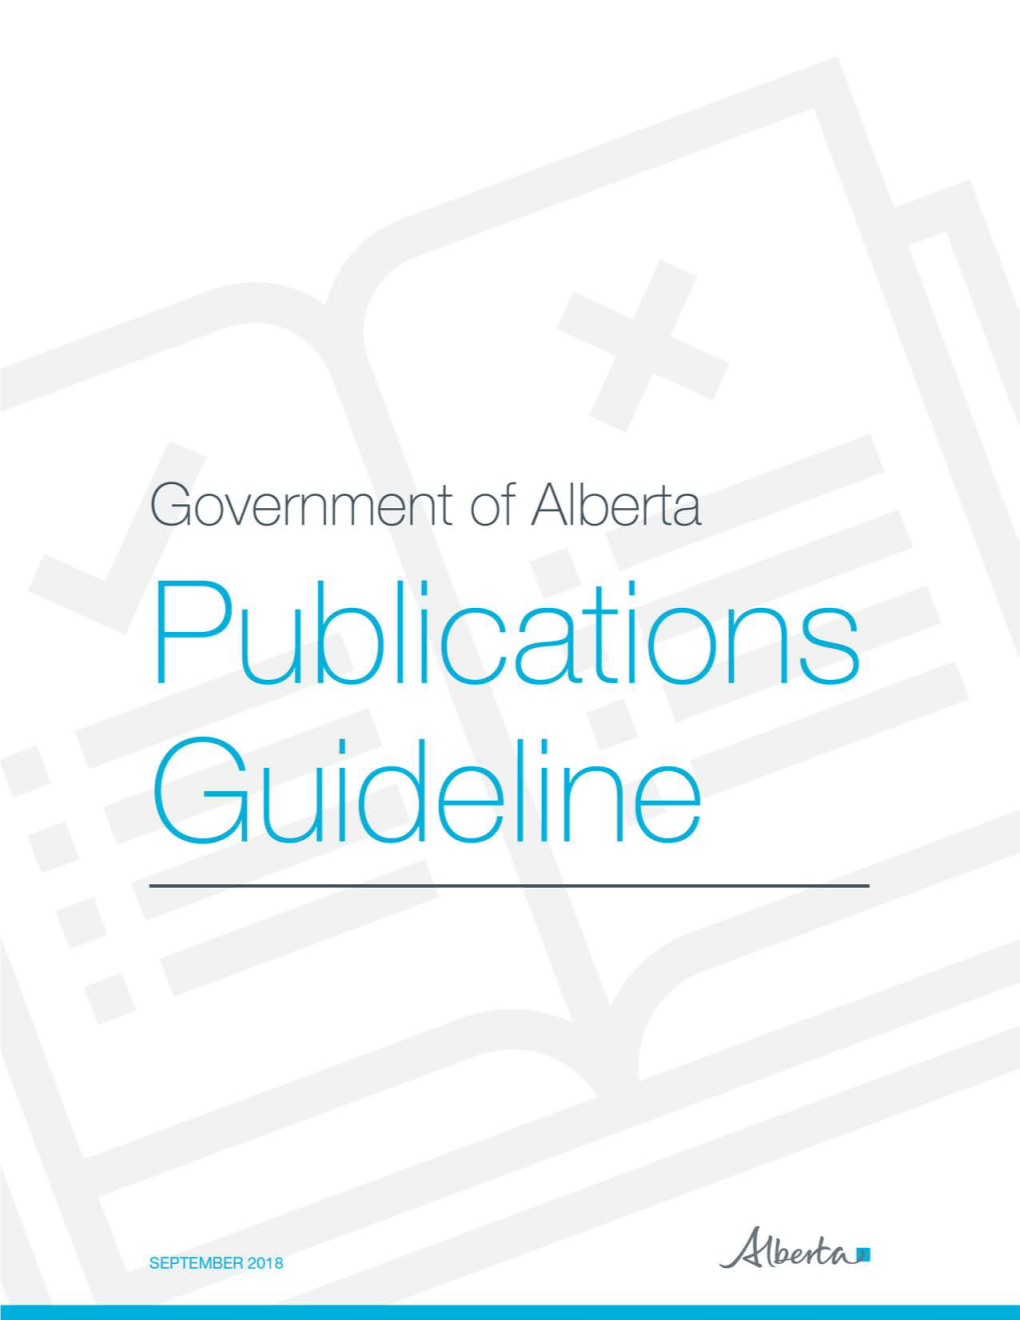 Government of Alberta Publications Guideline